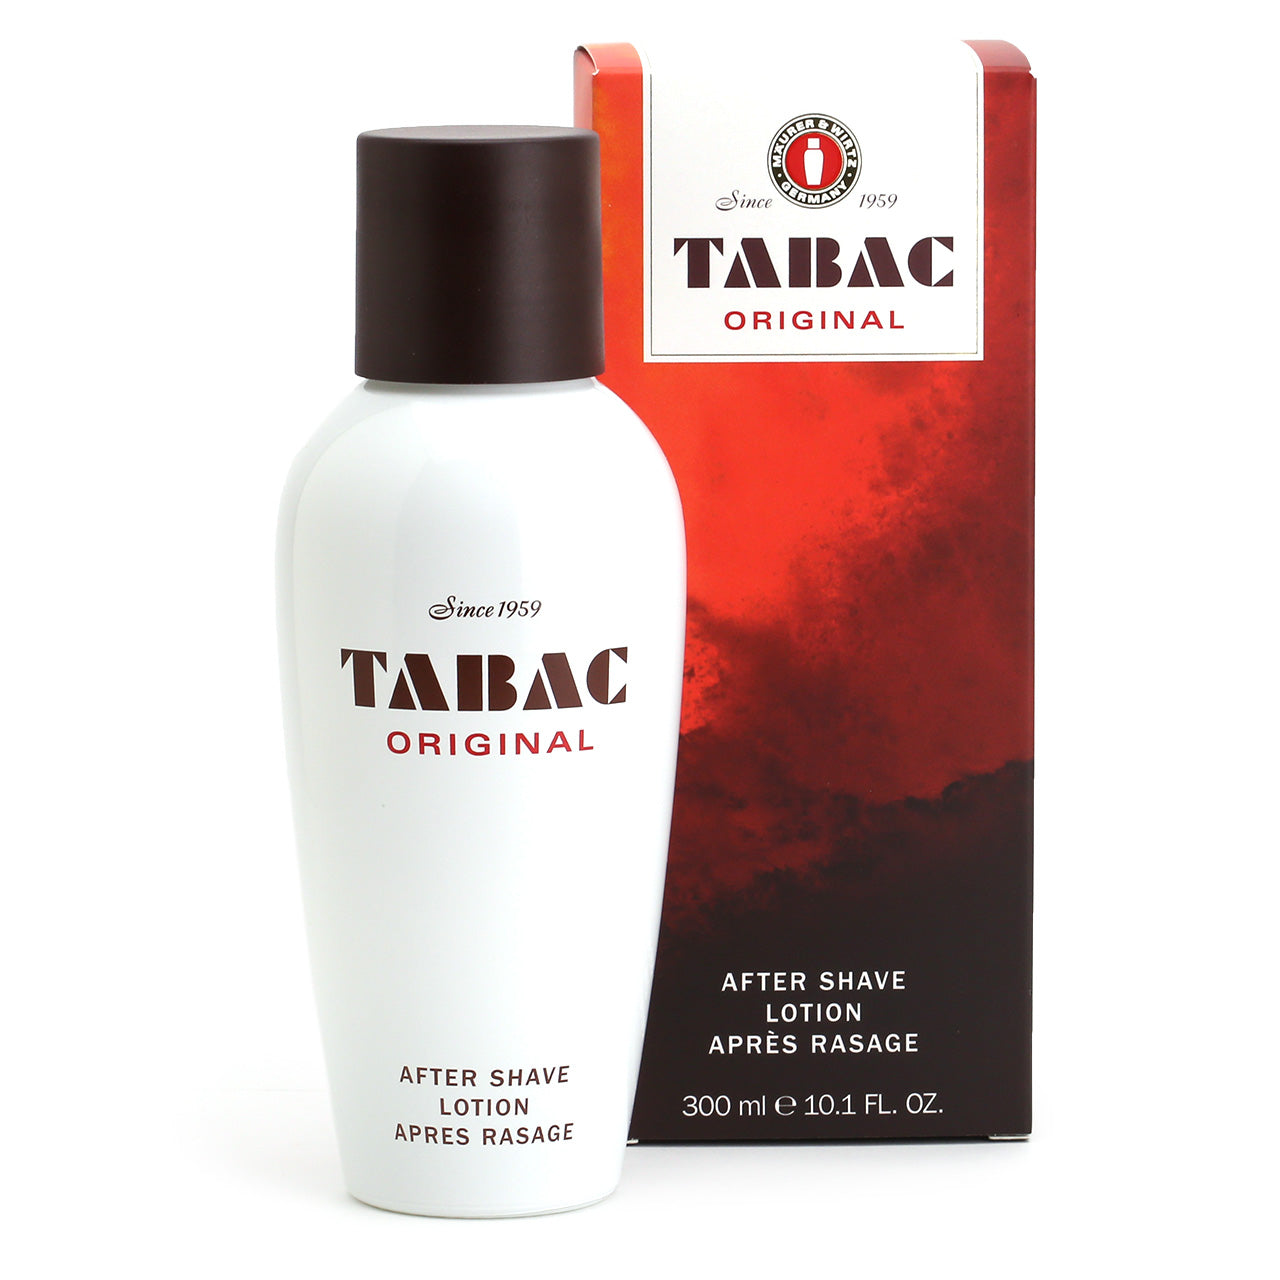 Tabac Original 300ml Aftershave Lotion with packaging box